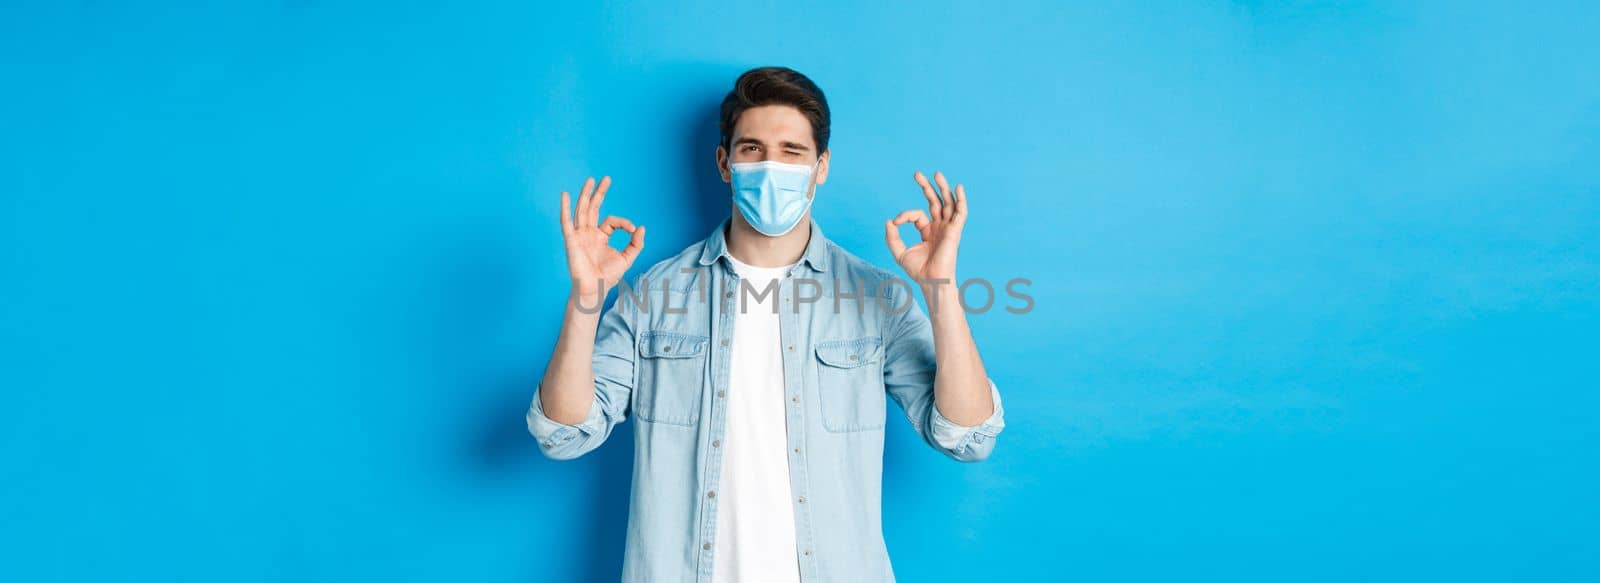 Concept of coronavirus, quarantine and social distancing. Cheeky man in medical mask winking, showing okay signs, assure or guarantee something, like and approve.